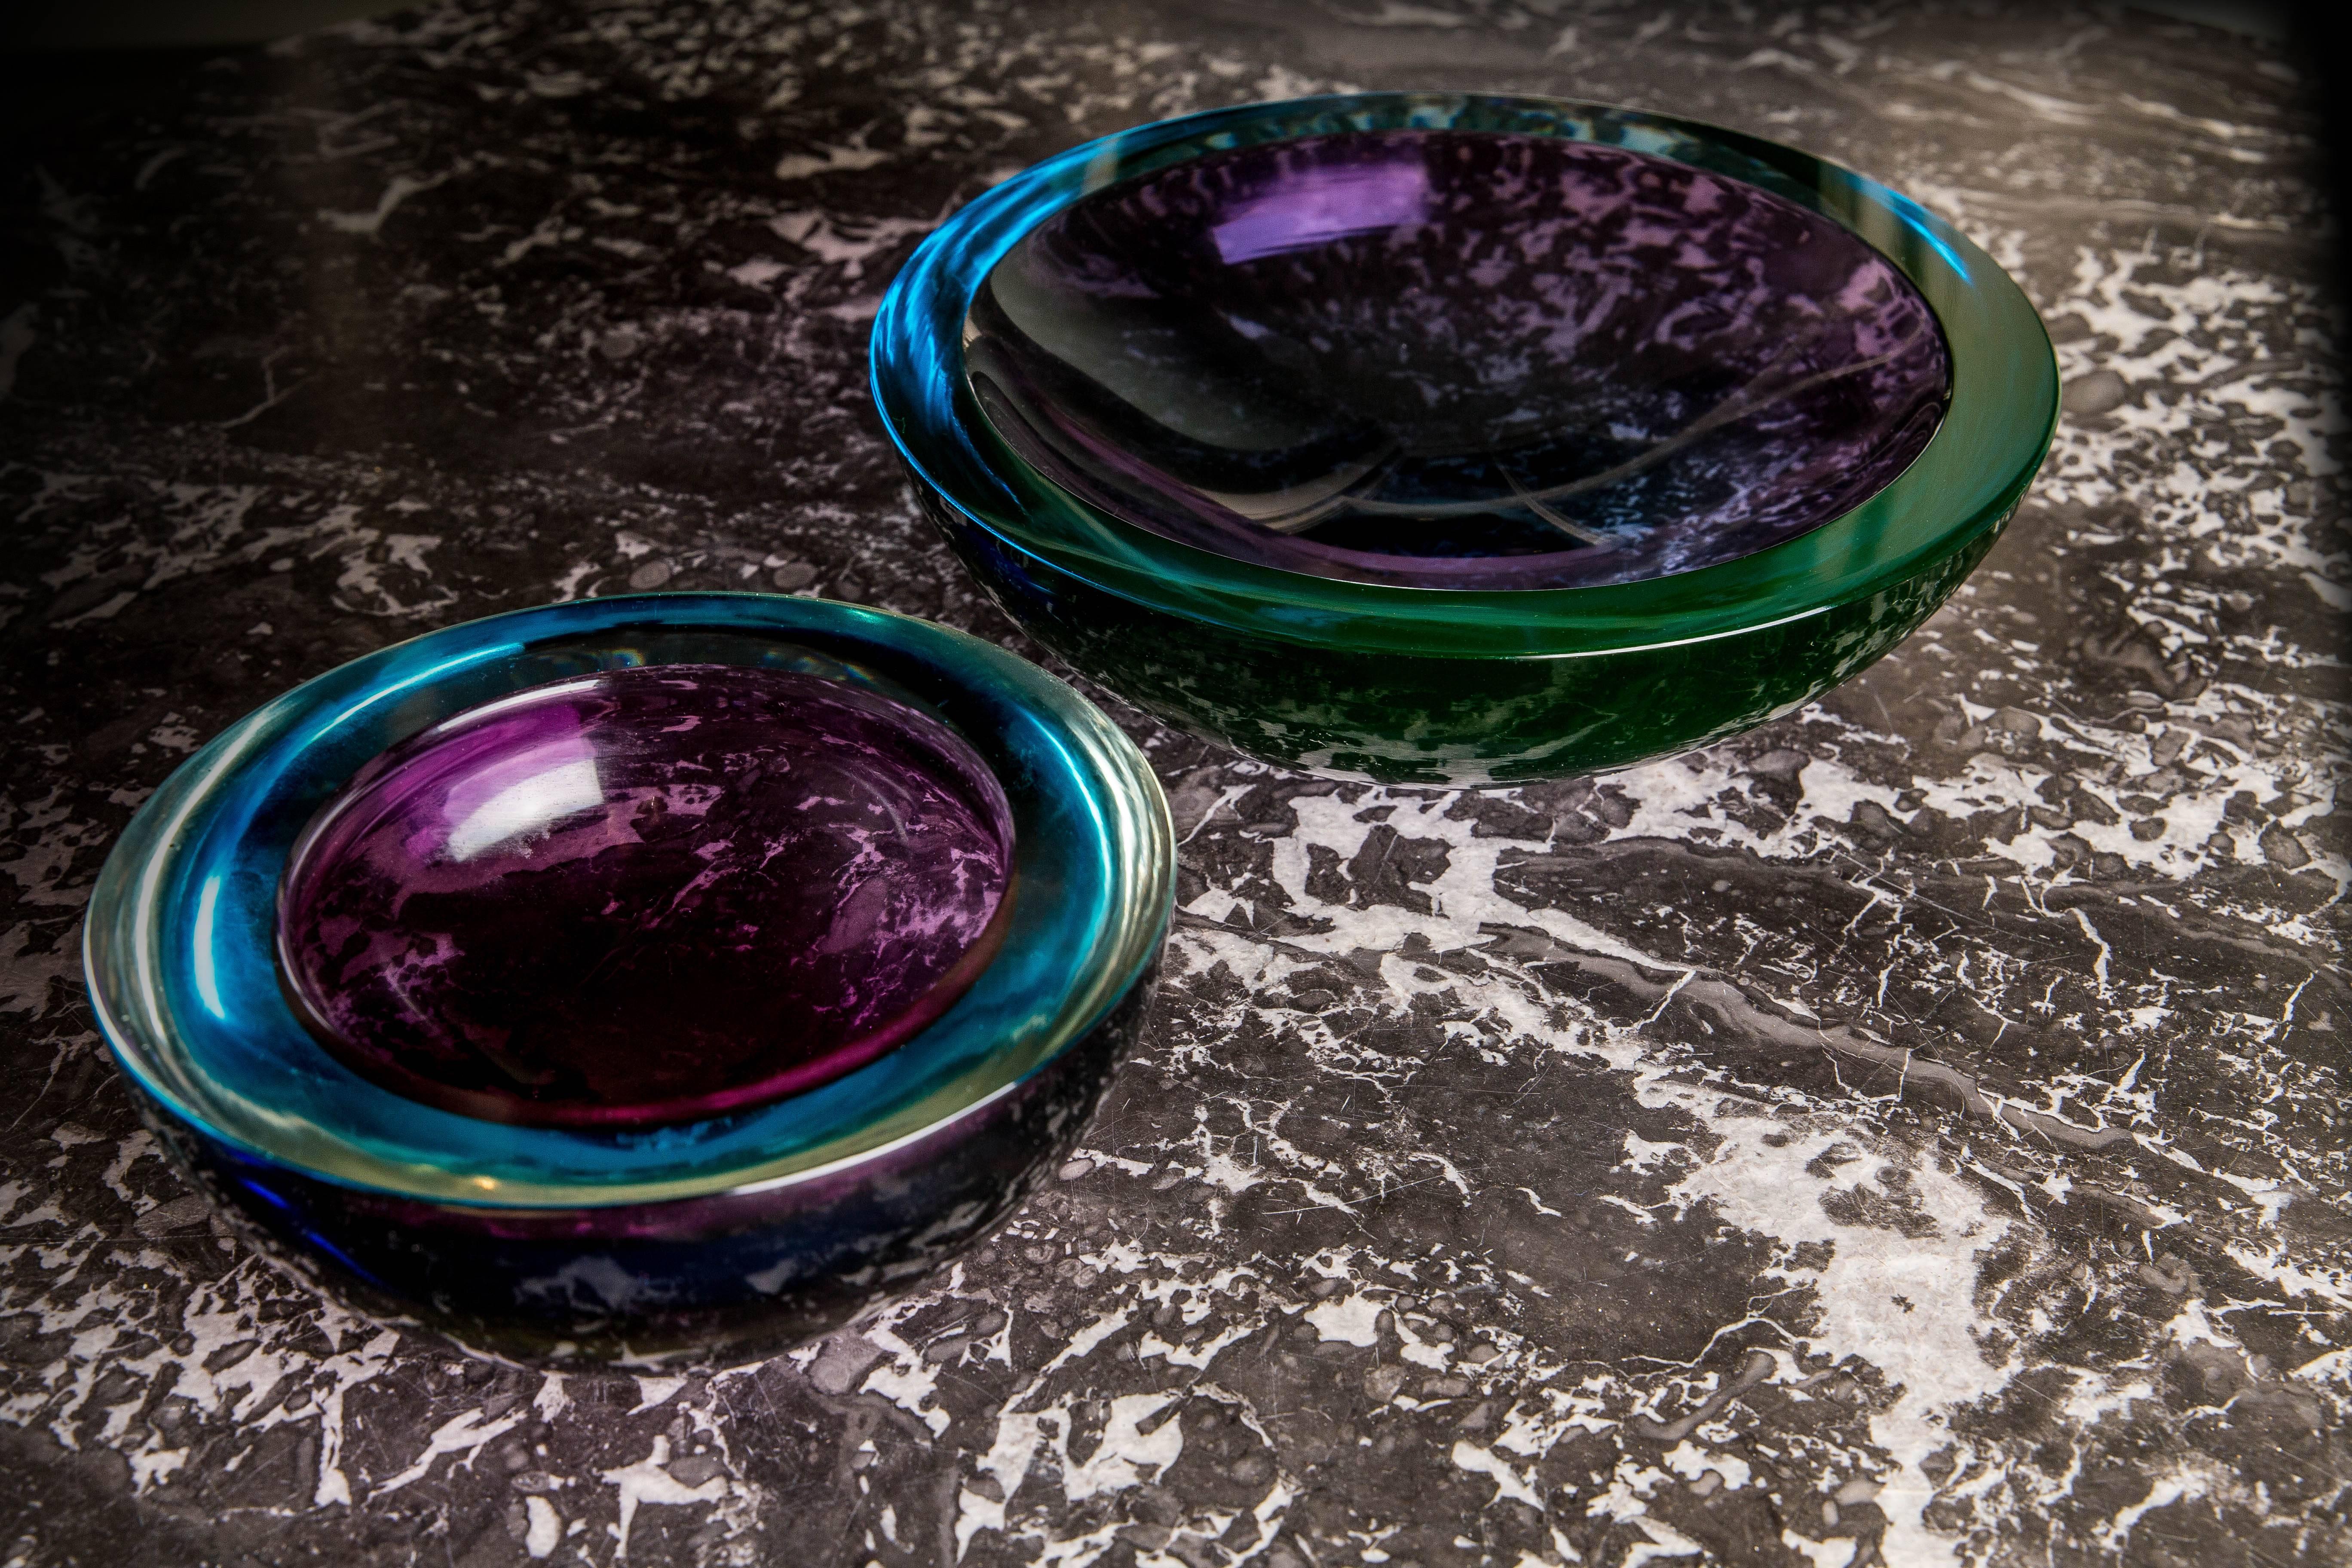 Exceptional Murano handblown Sommerso violet and green turquoise glass bowls with flat cut rims by designer/artist Flavio Poli. Stunning as a pair, exceptionally heavy thick Murano glass. The beautifully matched colours are a signature of his iconic